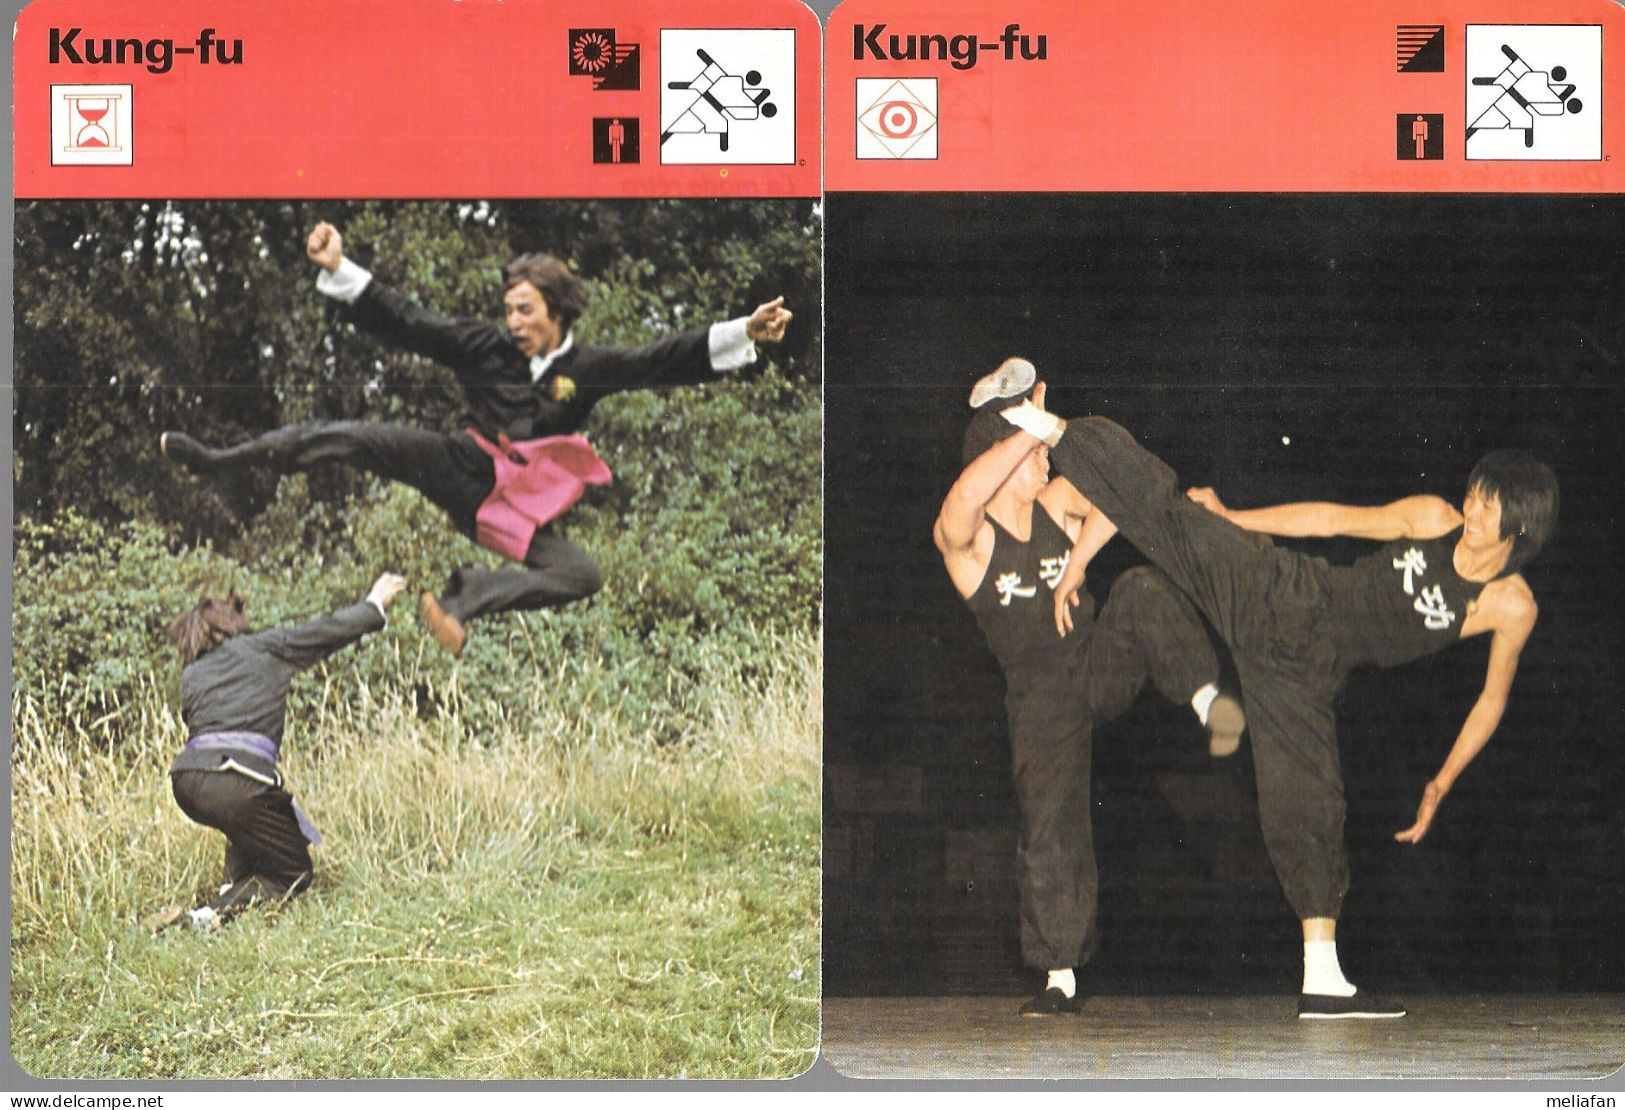 GF1042 - FICHES EDITION RENCONTRE - KUNG FU - Kampfsport